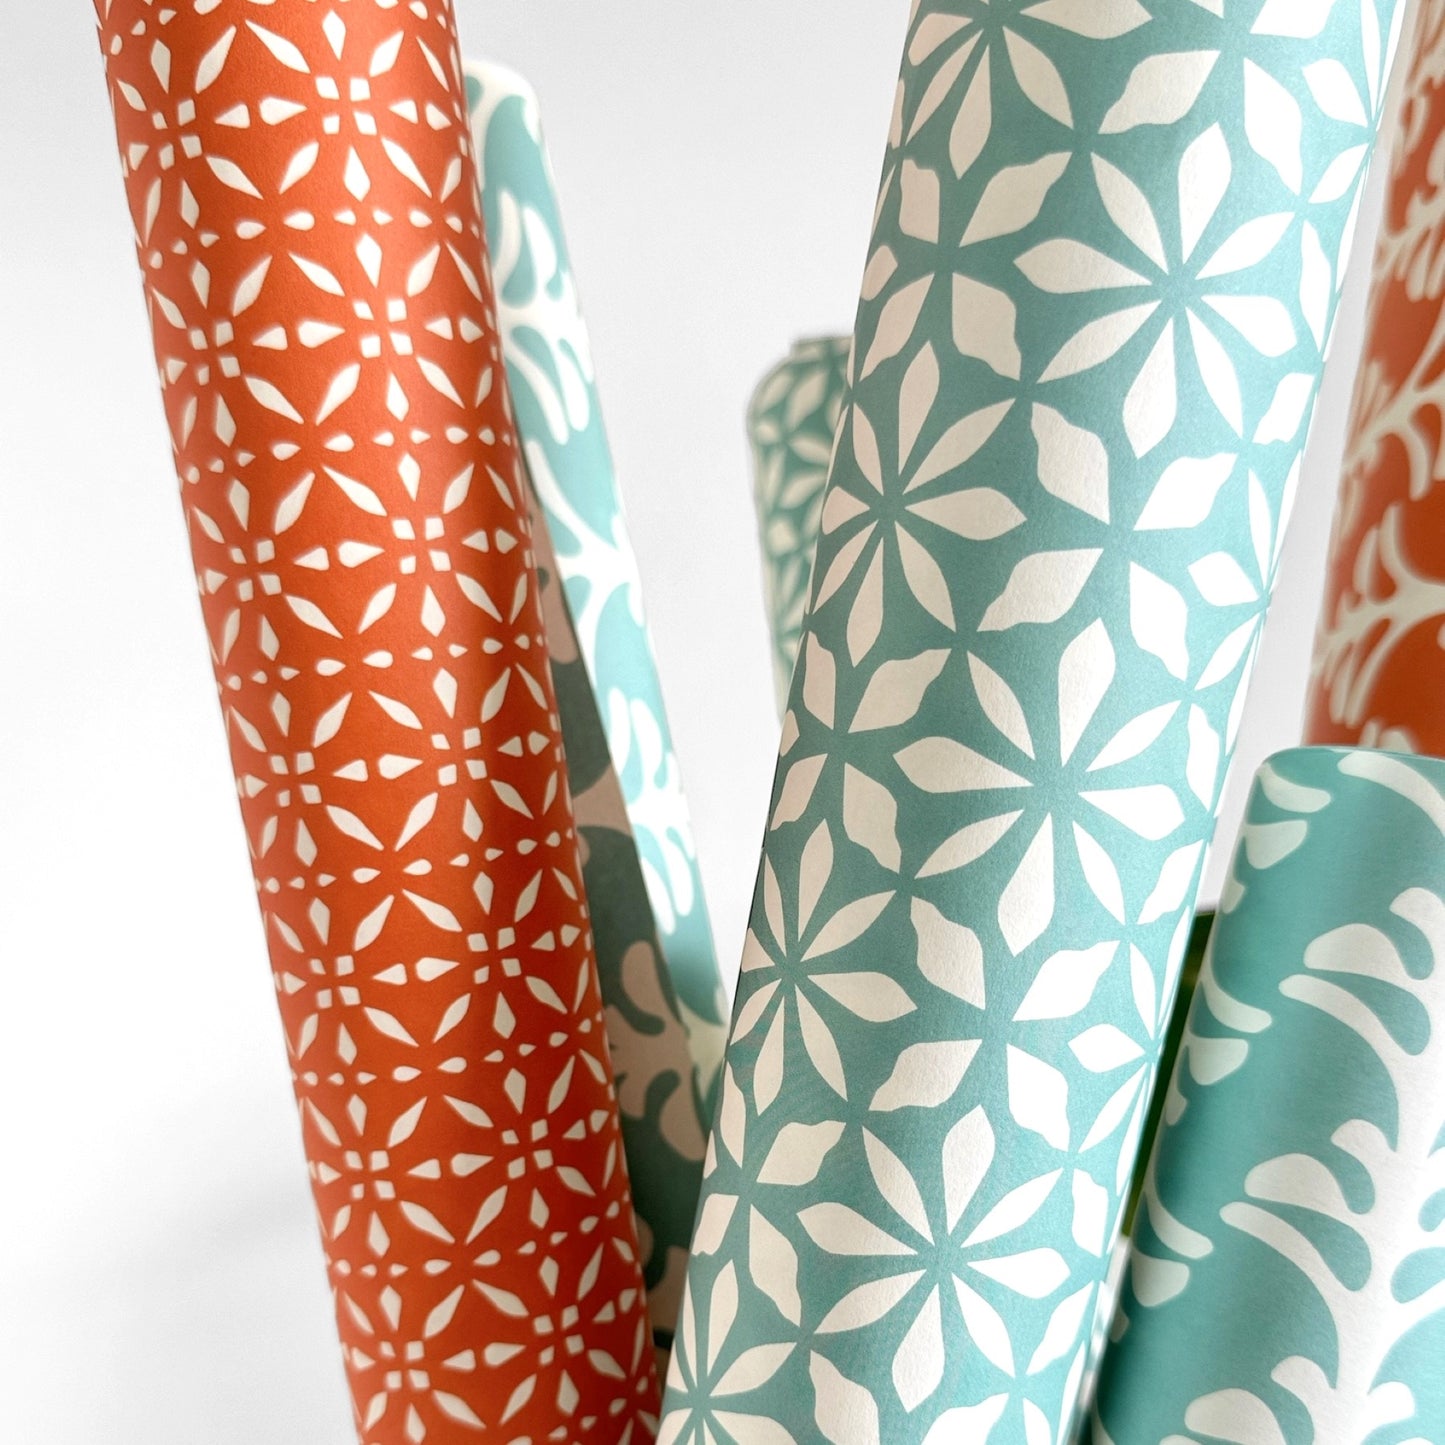 wrapping paper by Otto Editions with a cut-out flower design in white on an aqua blue background. Pictured rolled alongside other designs